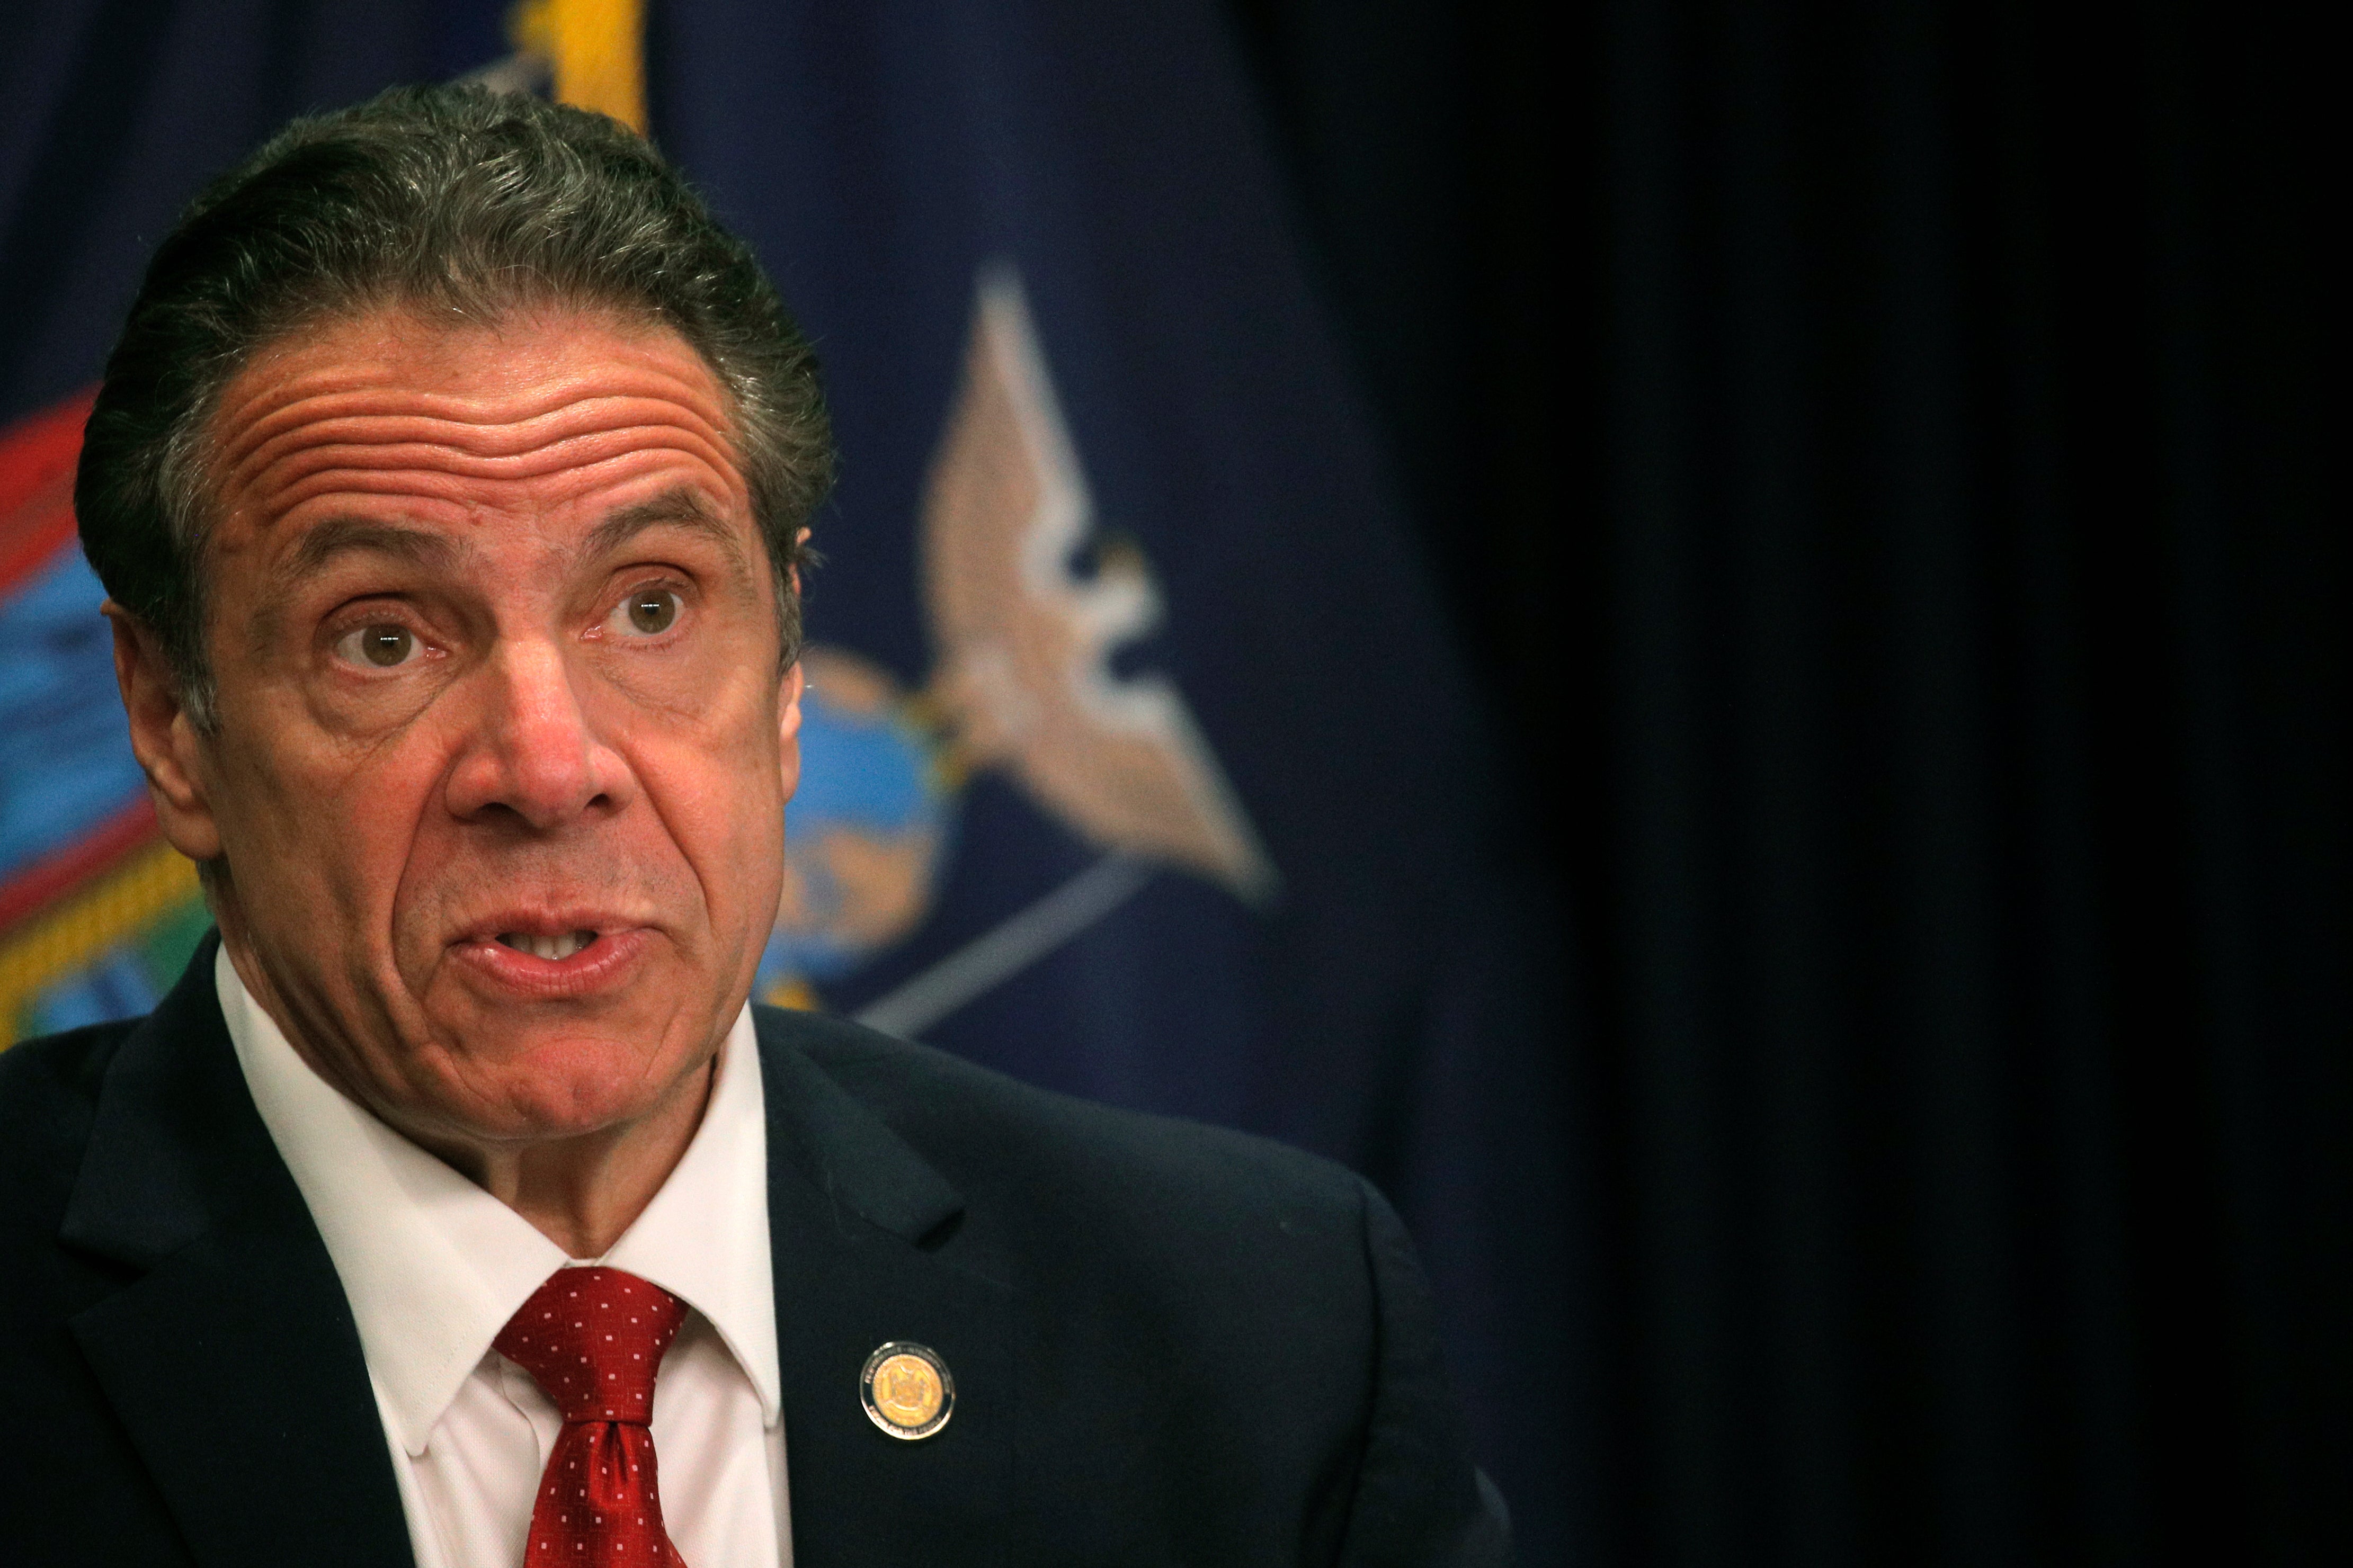 File photo: New York governor Andrew Cuomo speaks during a news conference at his offices in New York, Wednesday, March 24, 2021. Cuomo has been accused of giving special access to his family members and close aides to the state-administered Covid-19 tests